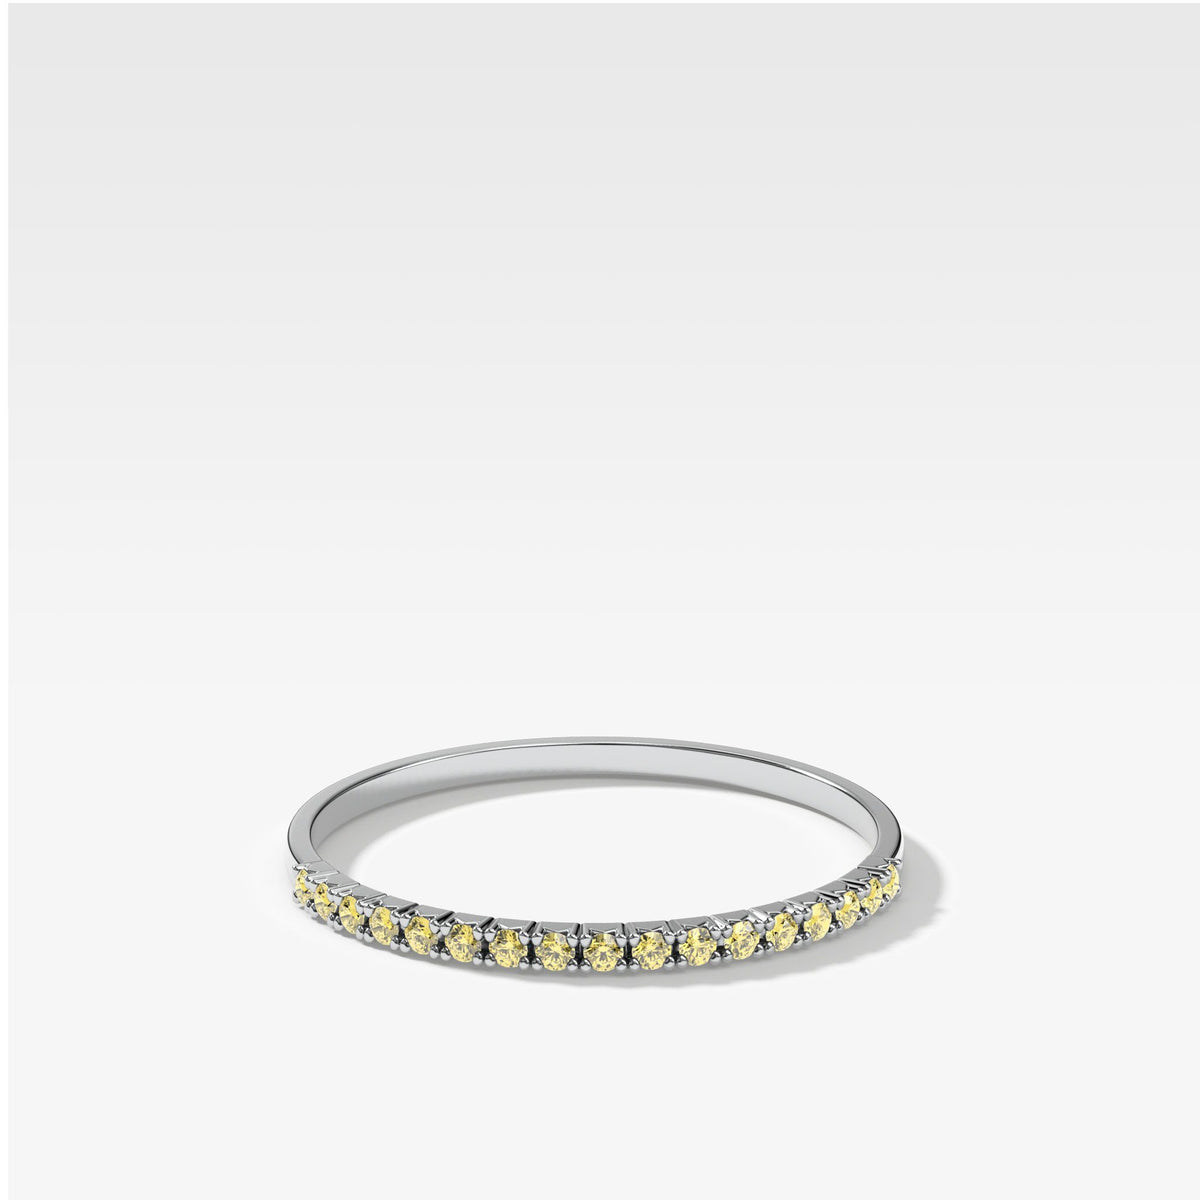 Petite French Pavé Stacker with Yellow Diamonds by Good Stone in White Gold